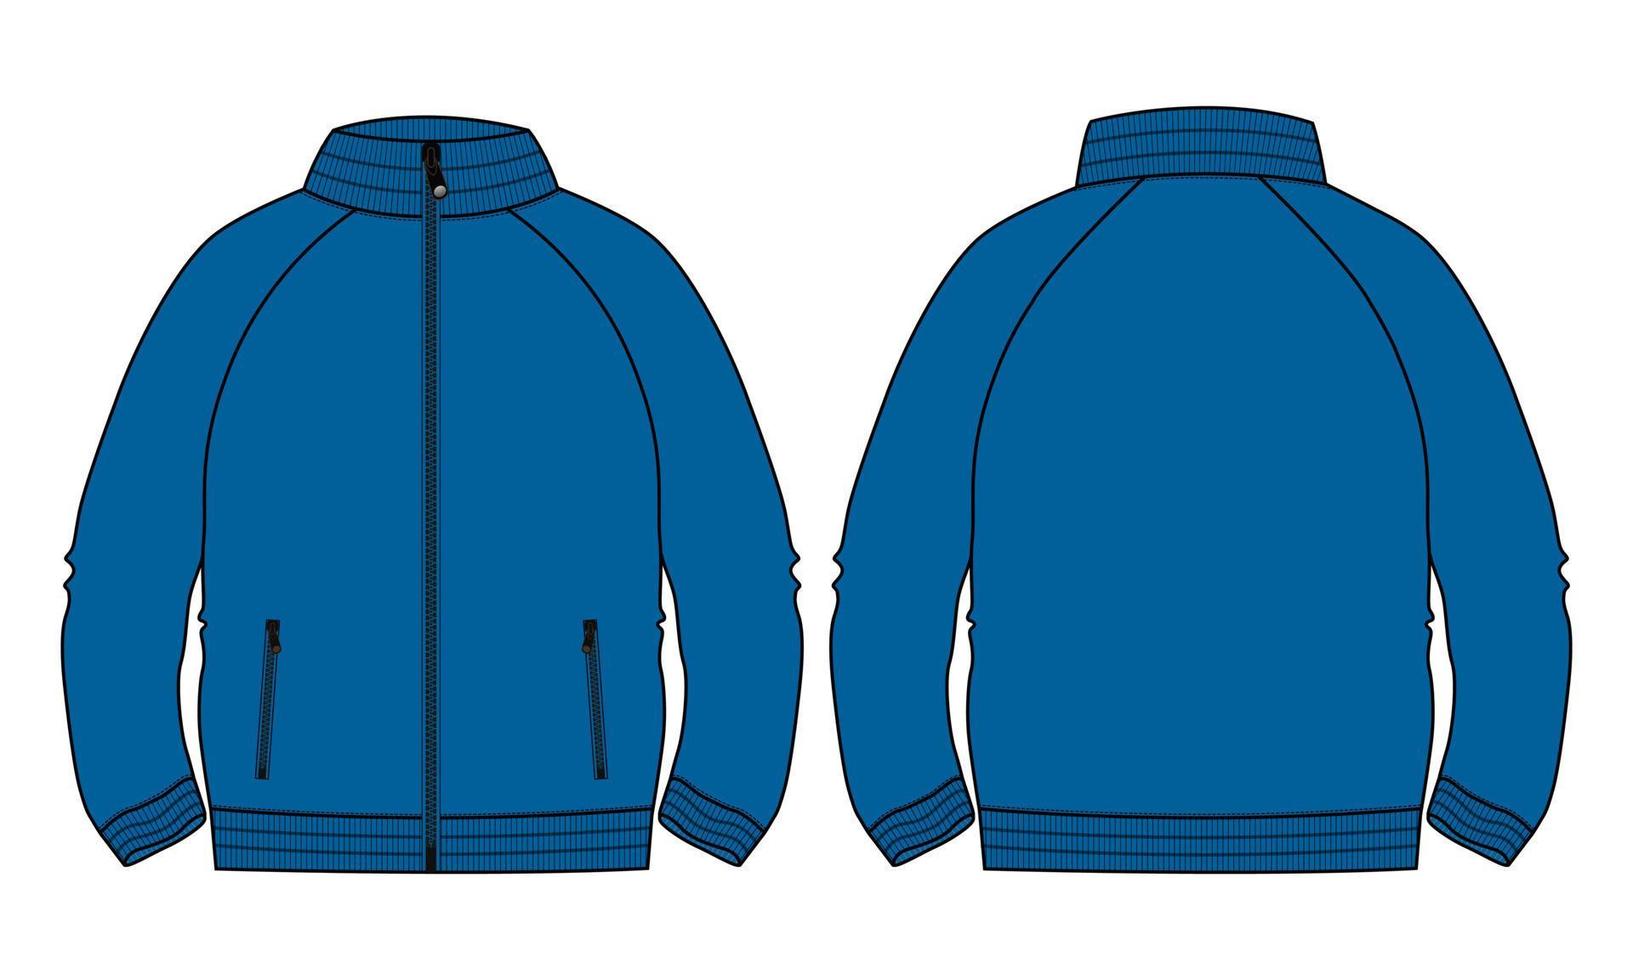 Long sleeve jacket with pocket and zipper technical fashion flat sketch vector illustration blue Color template. Fleece jersey sweatshirt jacket for men's and boys